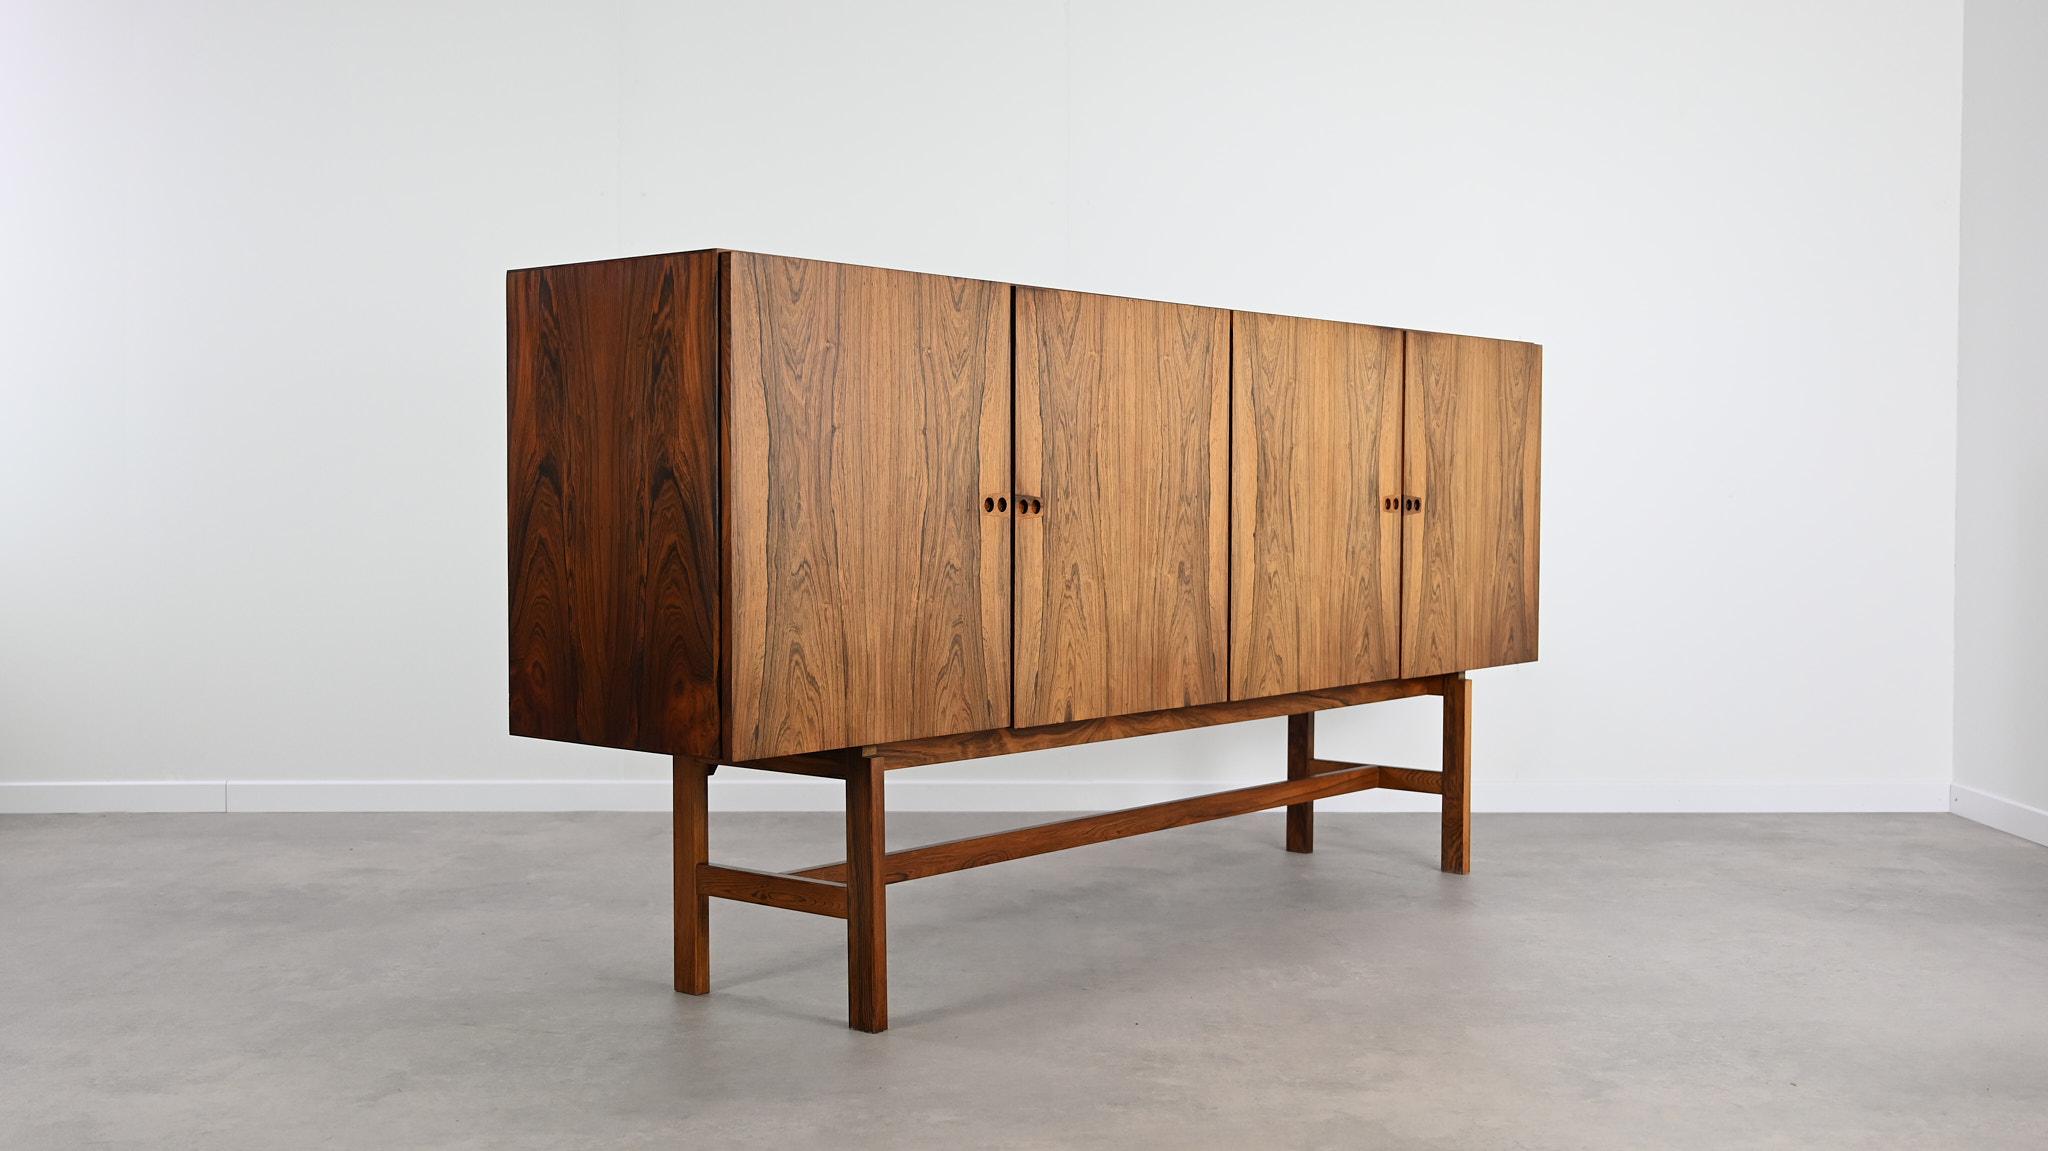 Arne Vodder, highboard for Sibast

Designed by Arne Vodder in the 60s and manufactured by Sibast, this elegant and minimalist highboard opens with four doors revealing adjustable shelves, a backlit mirrored section and five drawers.

Made with